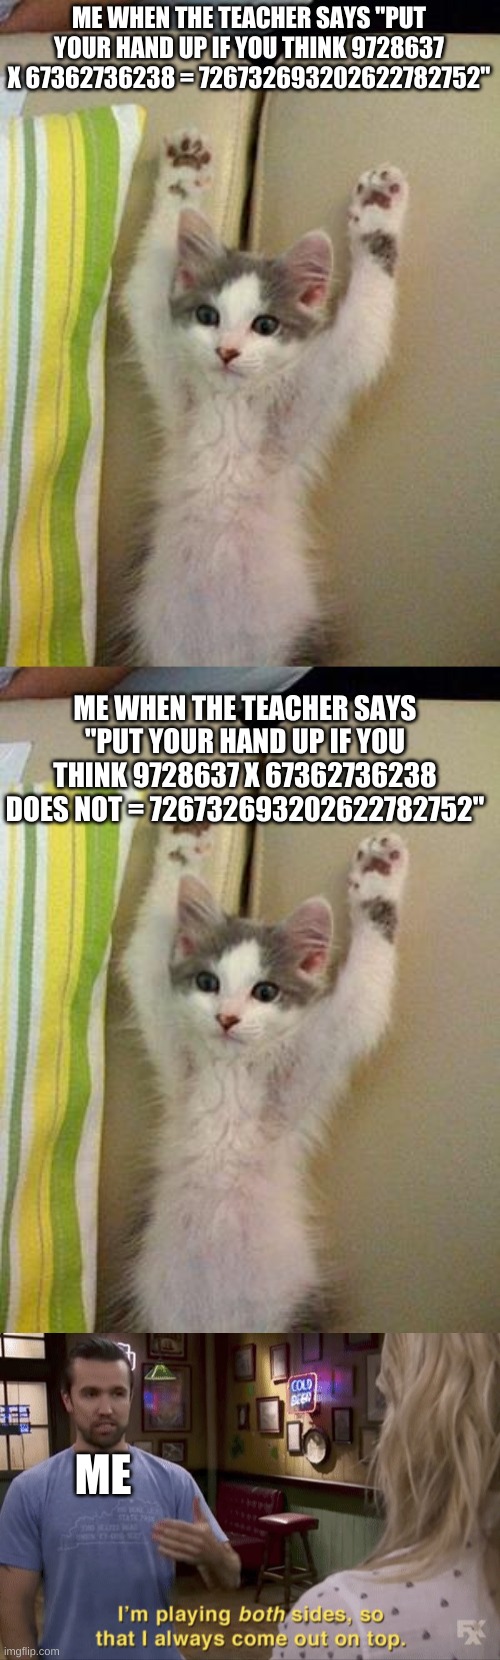 I'm playing both sides so I always come out on top | ME WHEN THE TEACHER SAYS "PUT YOUR HAND UP IF YOU THINK 9728637 X 67362736238 = 726732693202622782752"; ME WHEN THE TEACHER SAYS "PUT YOUR HAND UP IF YOU THINK 9728637 X 67362736238 DOES NOT = 726732693202622782752"; ME | image tagged in hands up kitten,i'm playing both sides | made w/ Imgflip meme maker